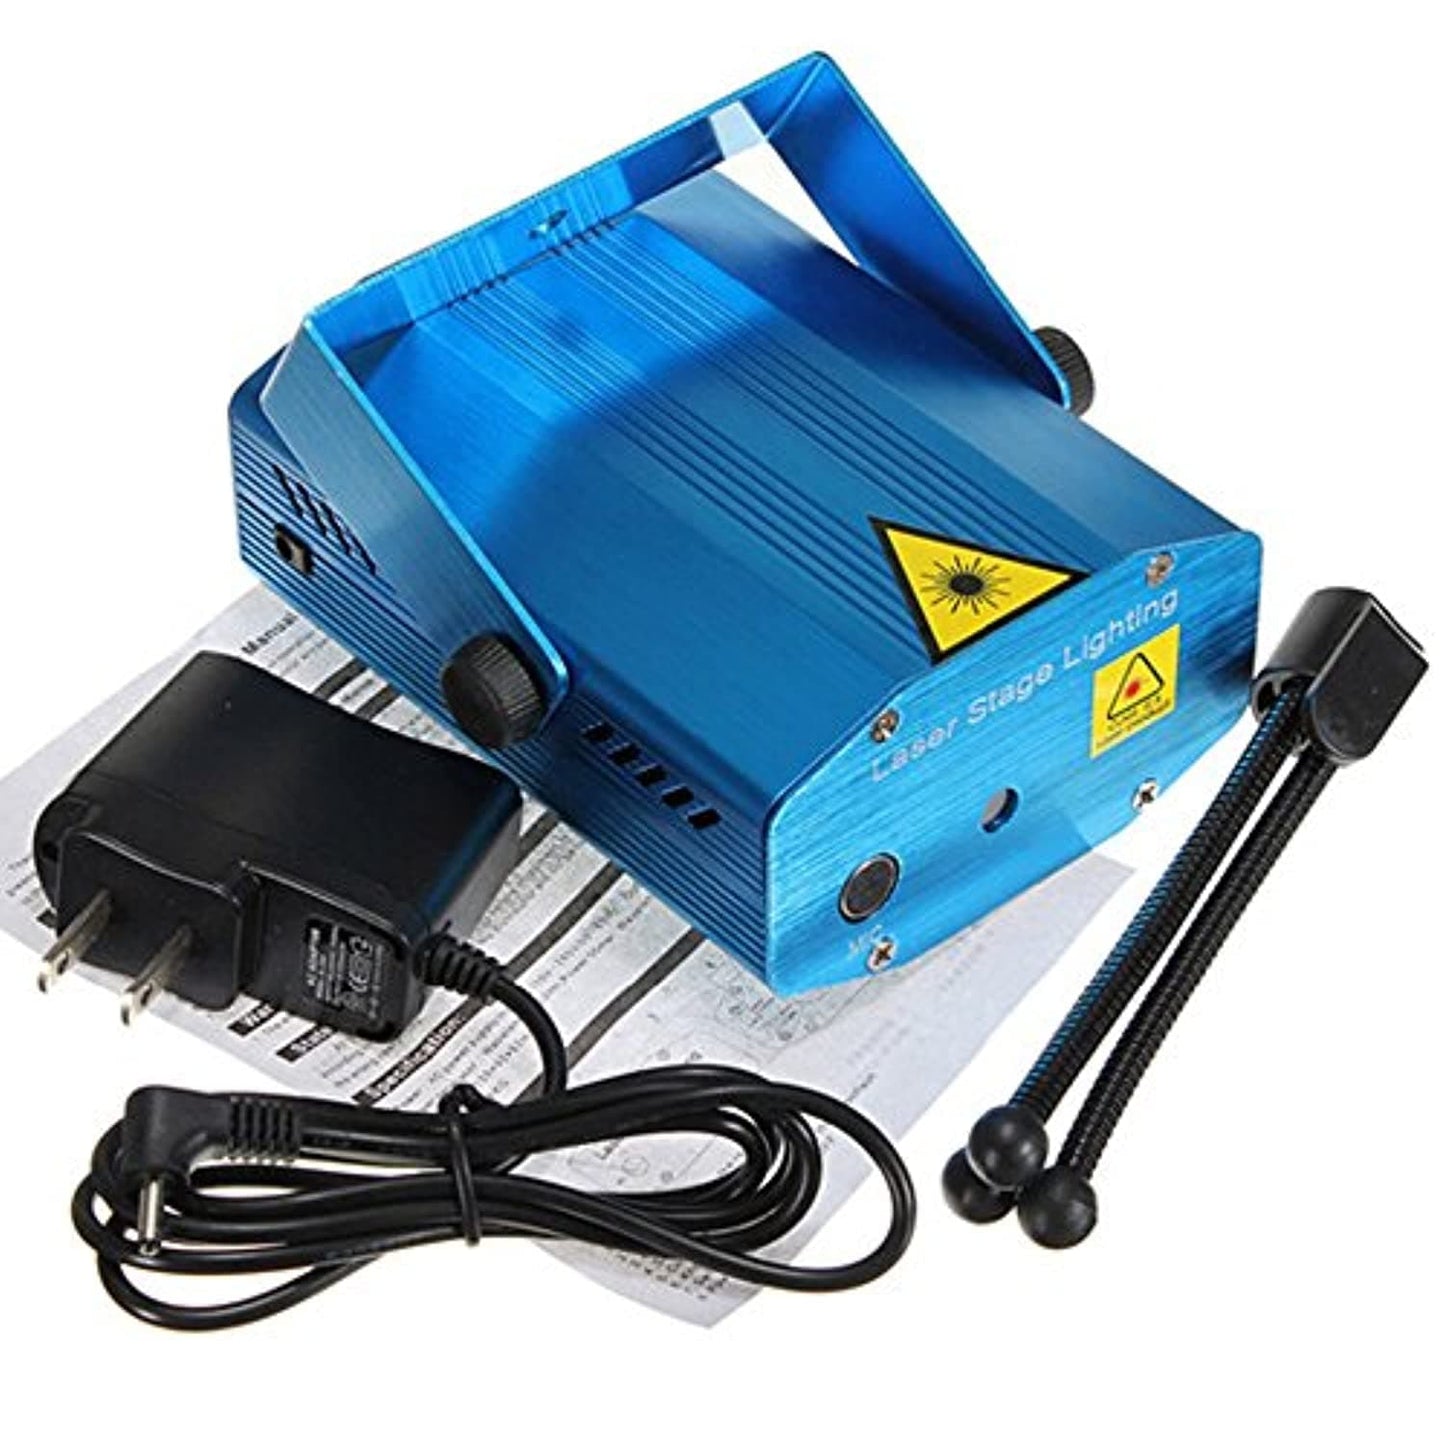 Mini Laser Projector Stage Lighting Sound Activated Laser Light for Home Party.